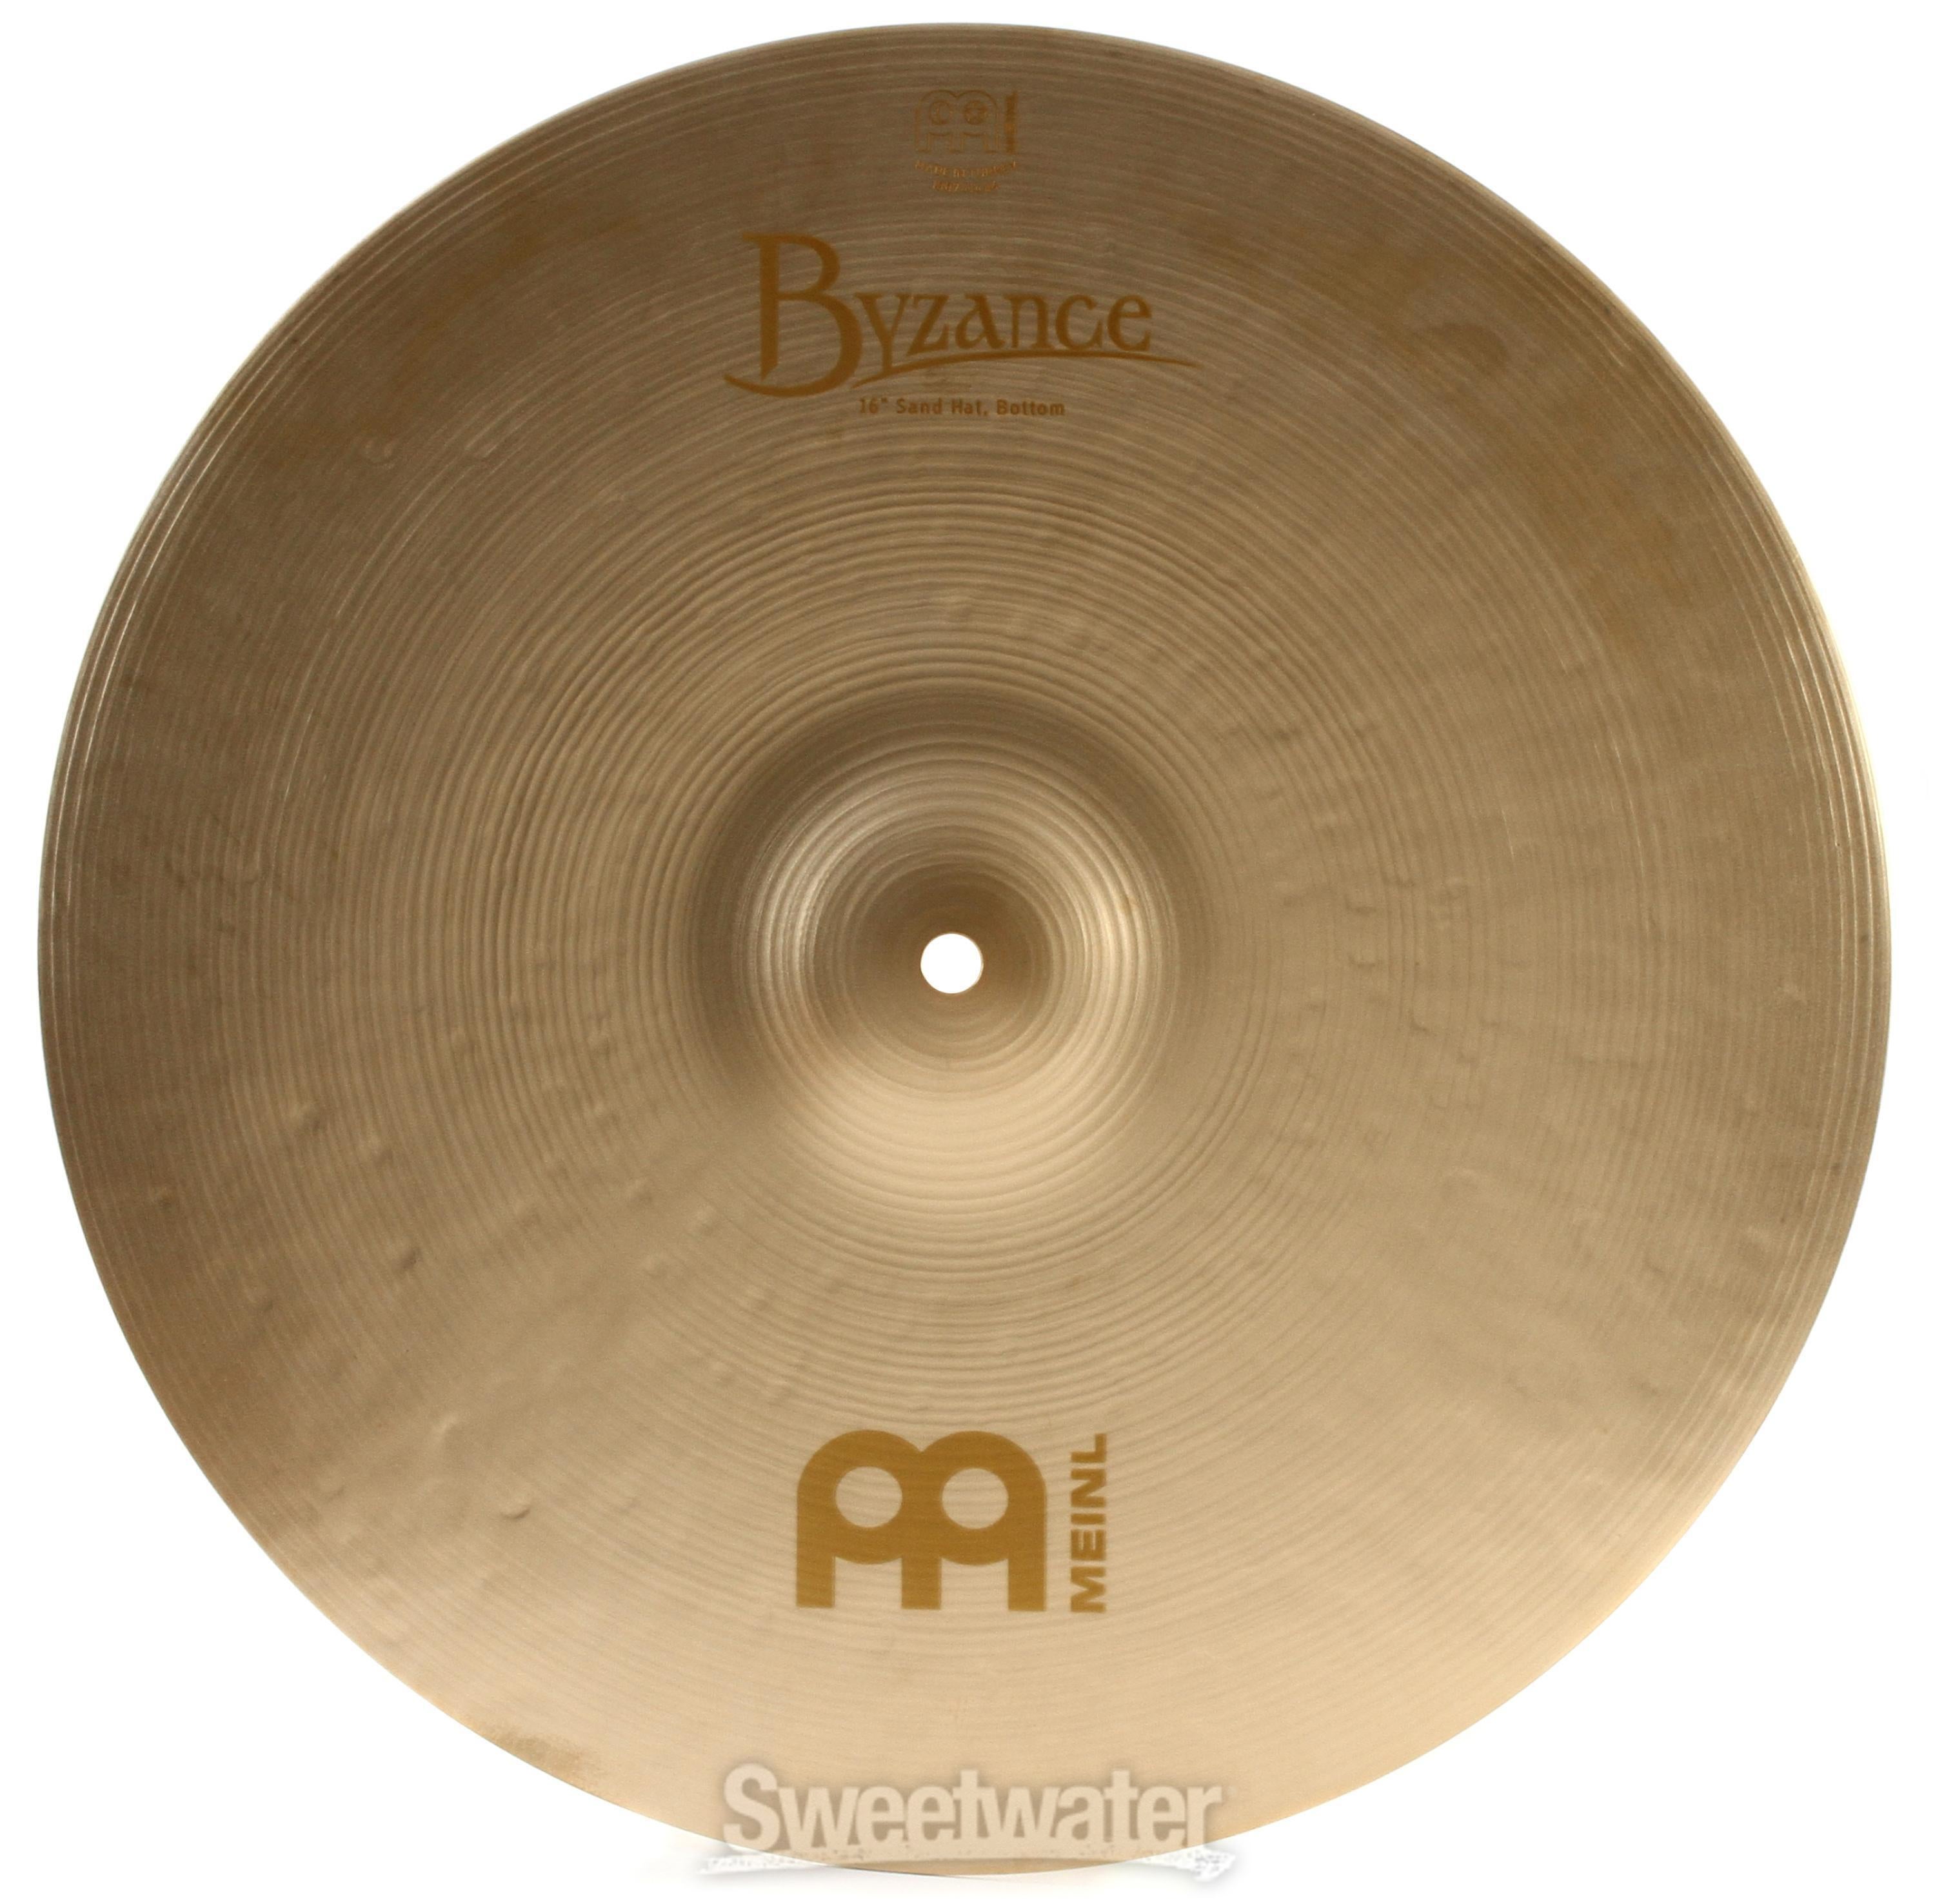 Meinl Cymbals 16 inch Byzance Vintage Sand Hi-hat Cymbals | Sweetwater